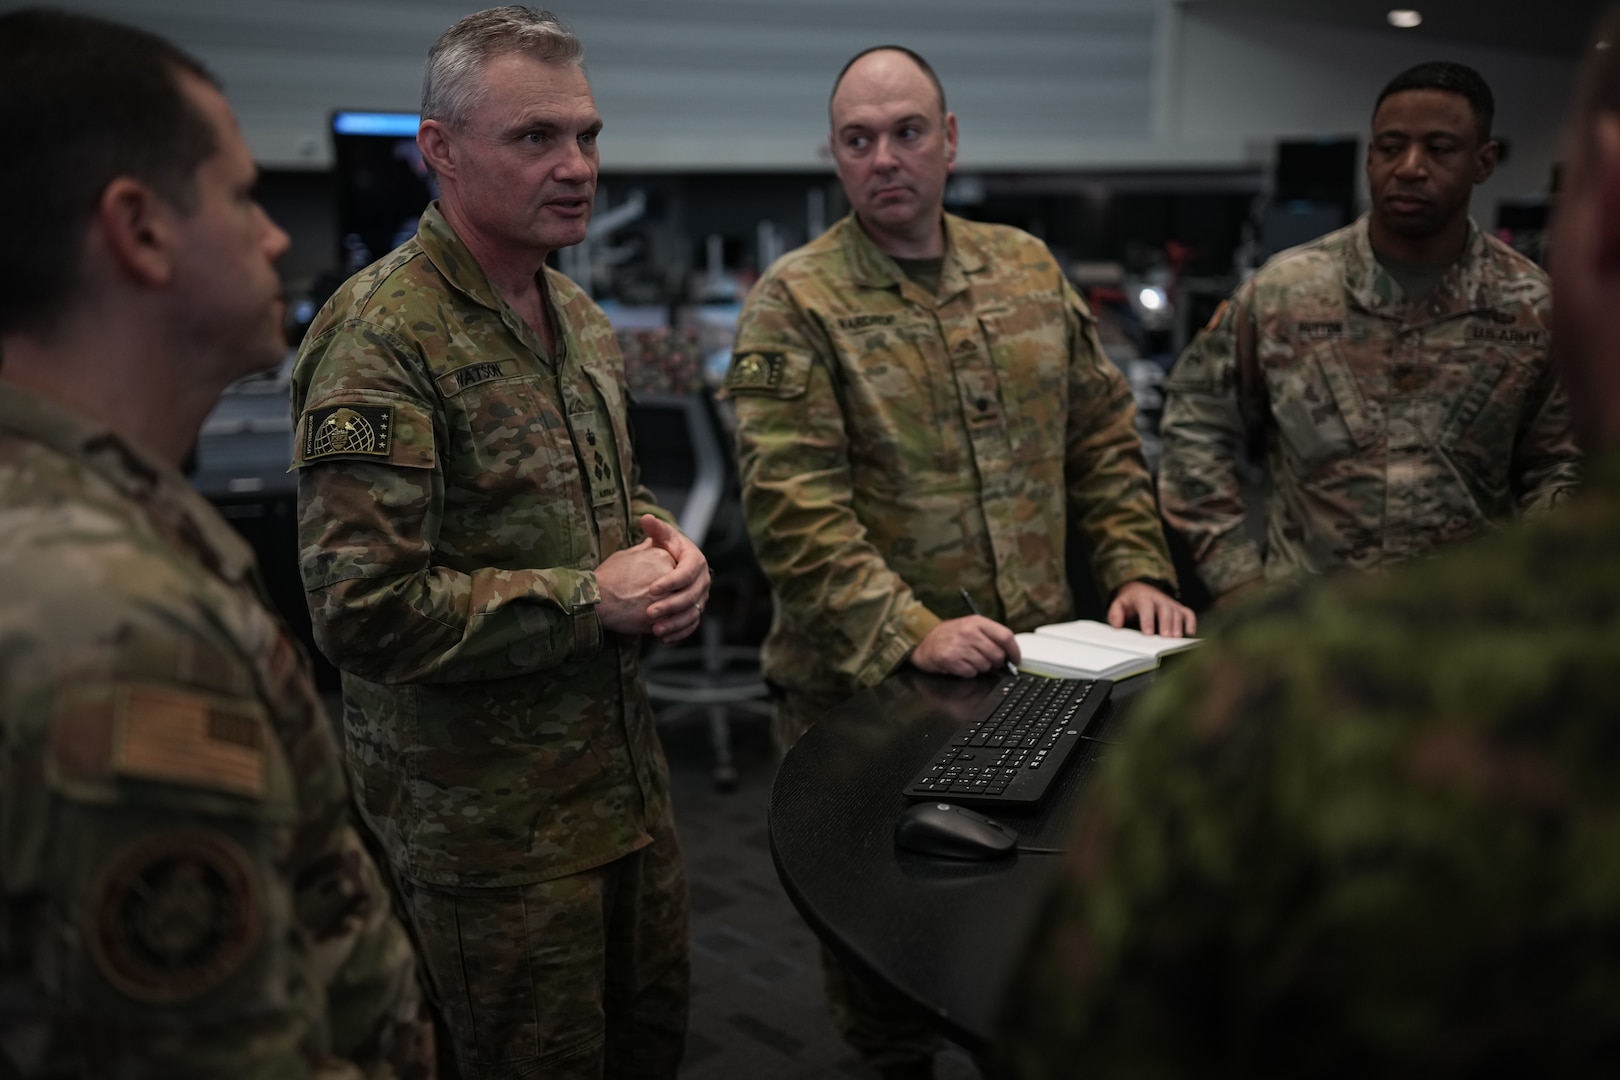 Joint Operation Center watch floor personnel at U.S. Cyber Command recap daily defensive cyber actions supporting an International Coordinated Cyber Security Activity.